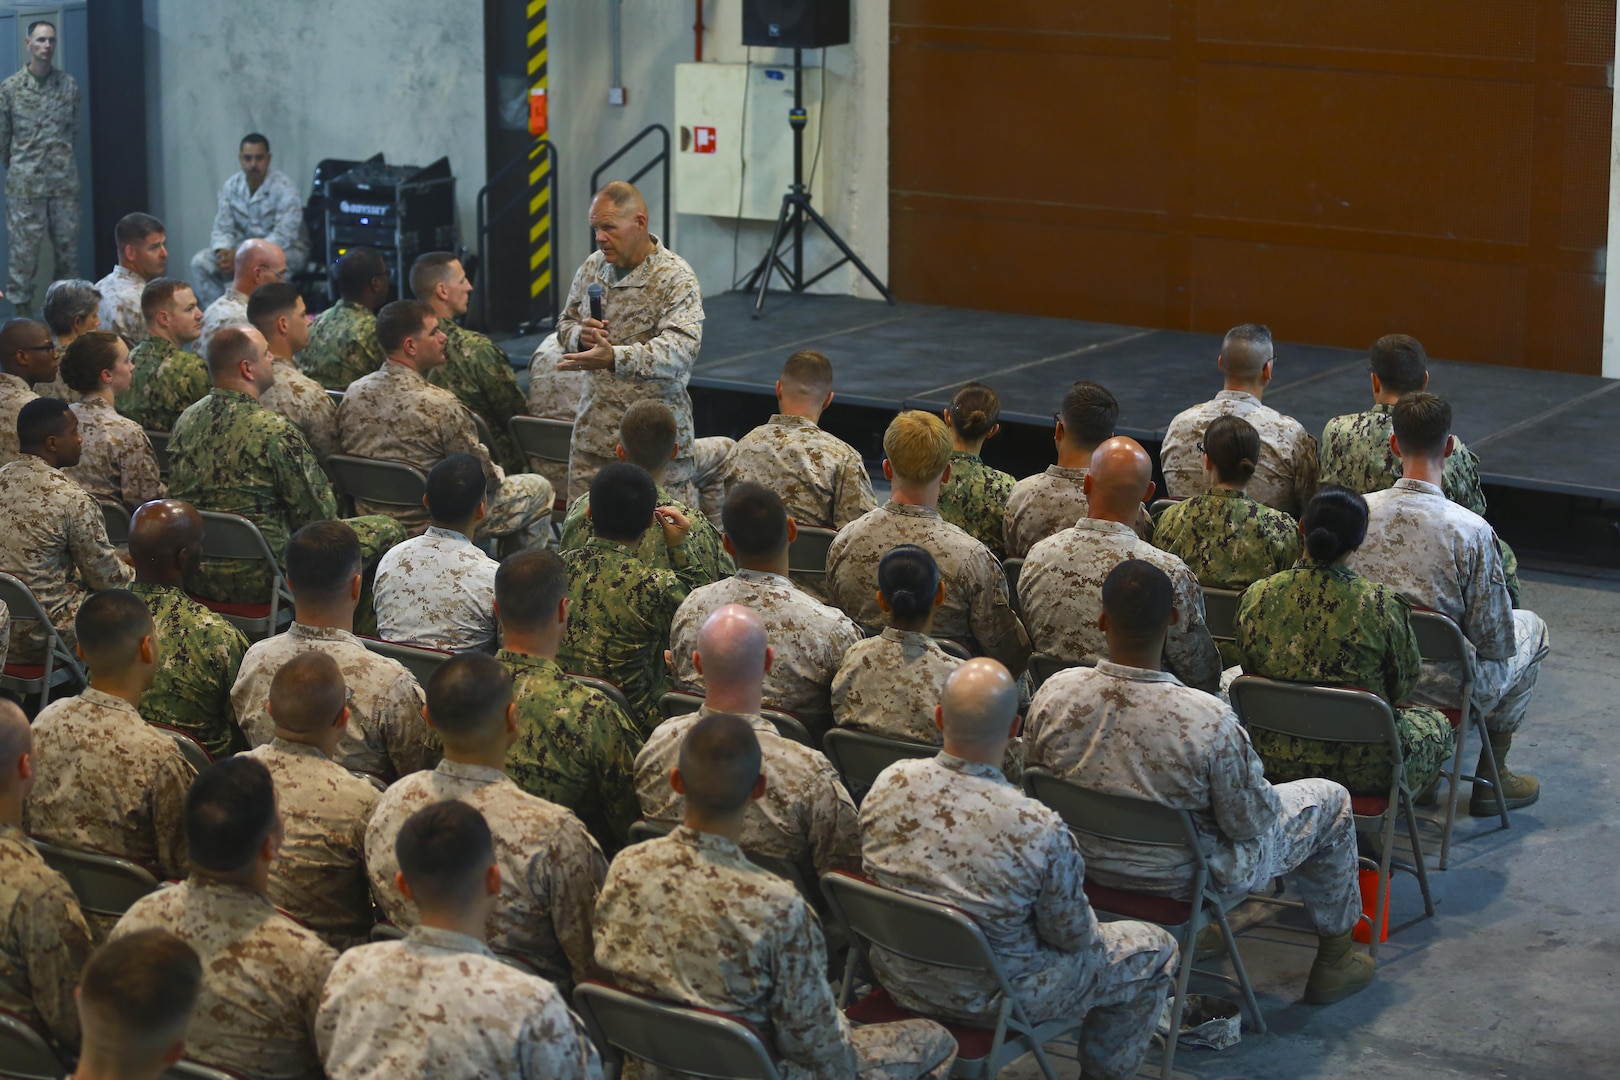 Commandant of the Marine Corps, Gen. Robert B. Neller speaks to the Marines and Sailors with Naval Amphibious Forces, Task Force 51/5th Marine Expeditionary Brigade (TF 51/5) during a town-hall meeting aboard Naval Support Activity Bahrain, June 21. During the town-hall, Neller discussed updated social media guidance, his expectation that Marines will treat each other with dignity and respect, as well as, the importance of naval integration. (U.S. Marine Corps photo by Cpl. Travis Jordan/Released)